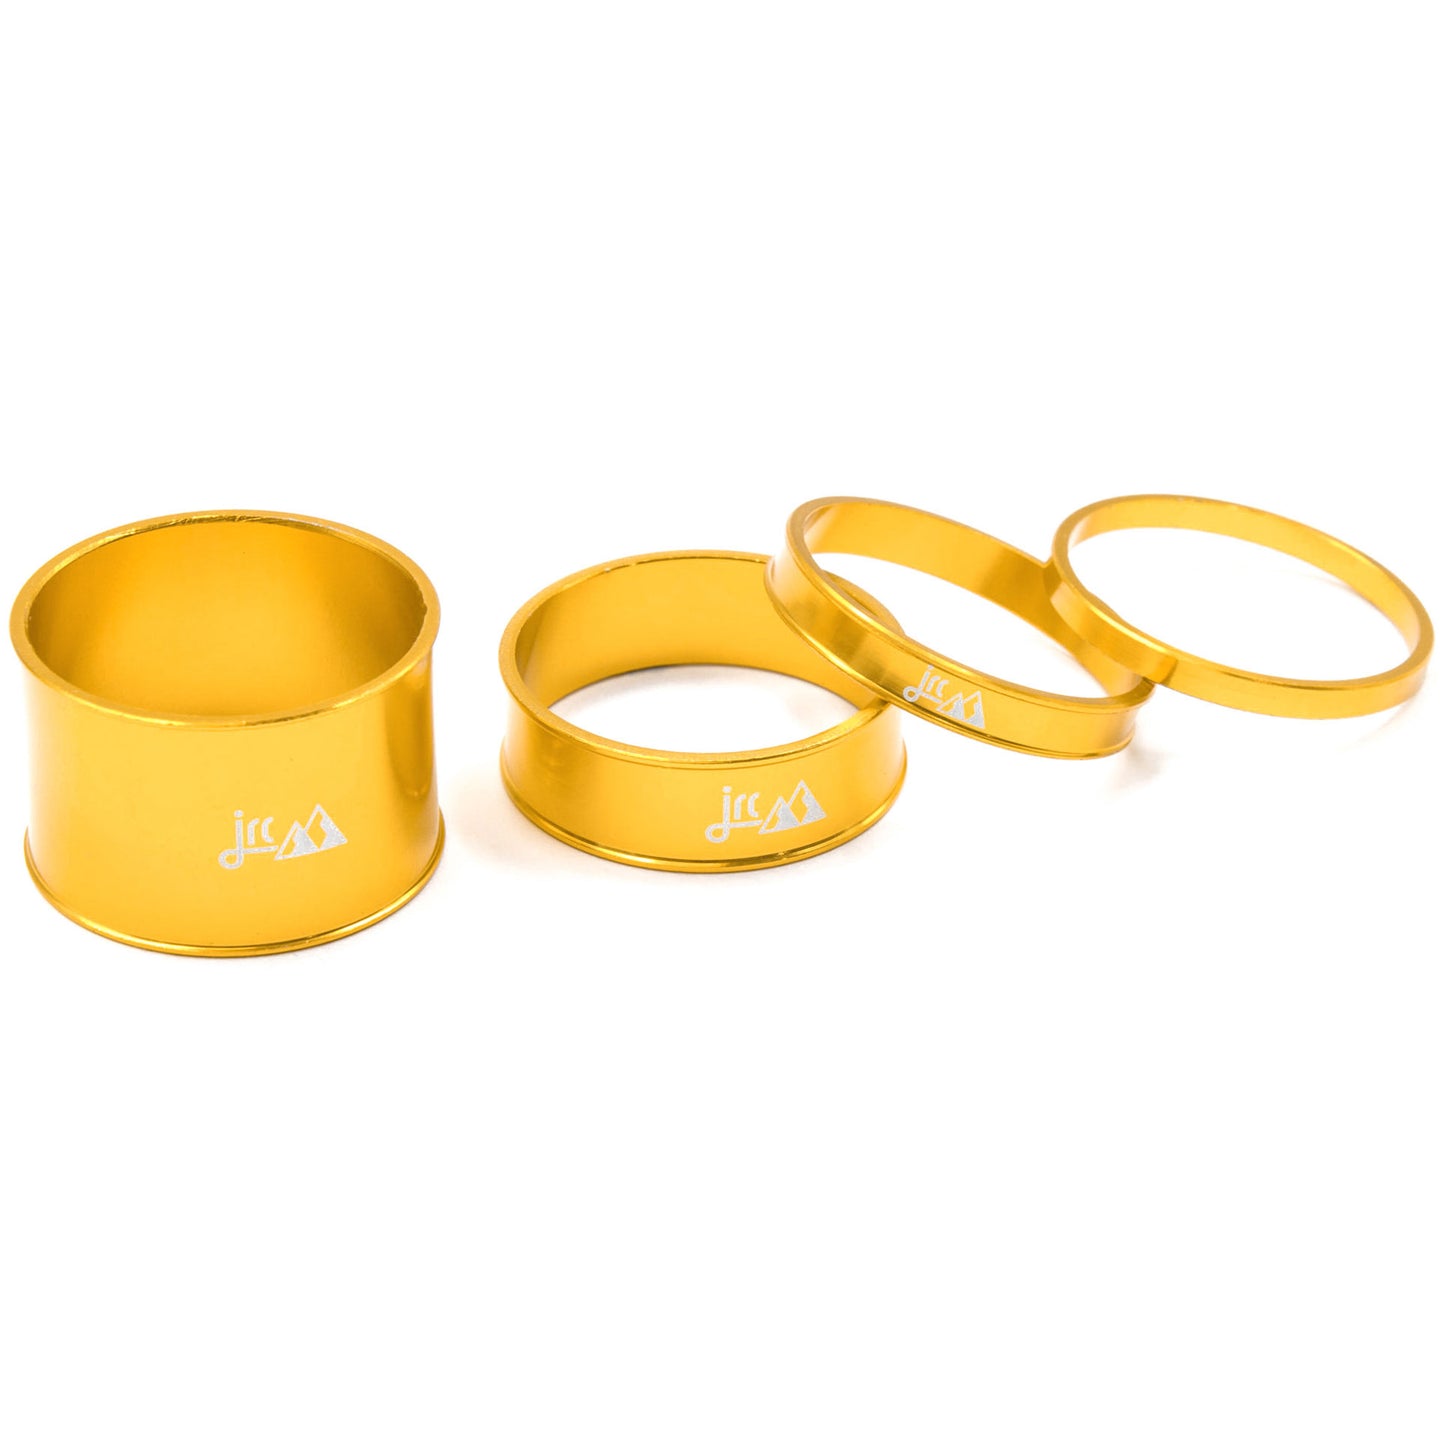 Gold, lightweight aluminium bicycle headset spacer kit with 4 sizes.